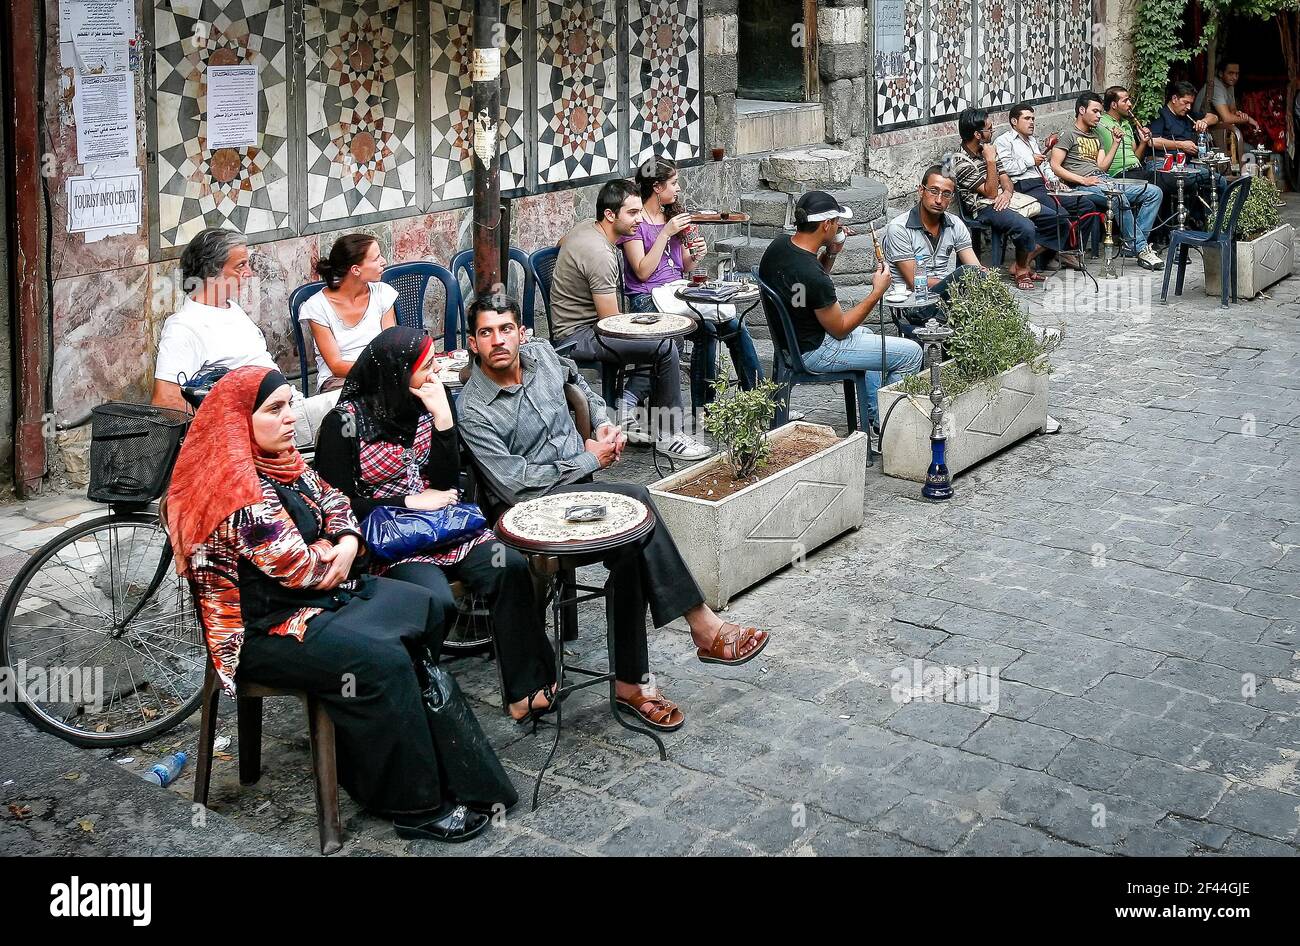 Damascus,Syria - August 03,2010 : People smoking shisha in a cafe in Damascus. Stock Photo